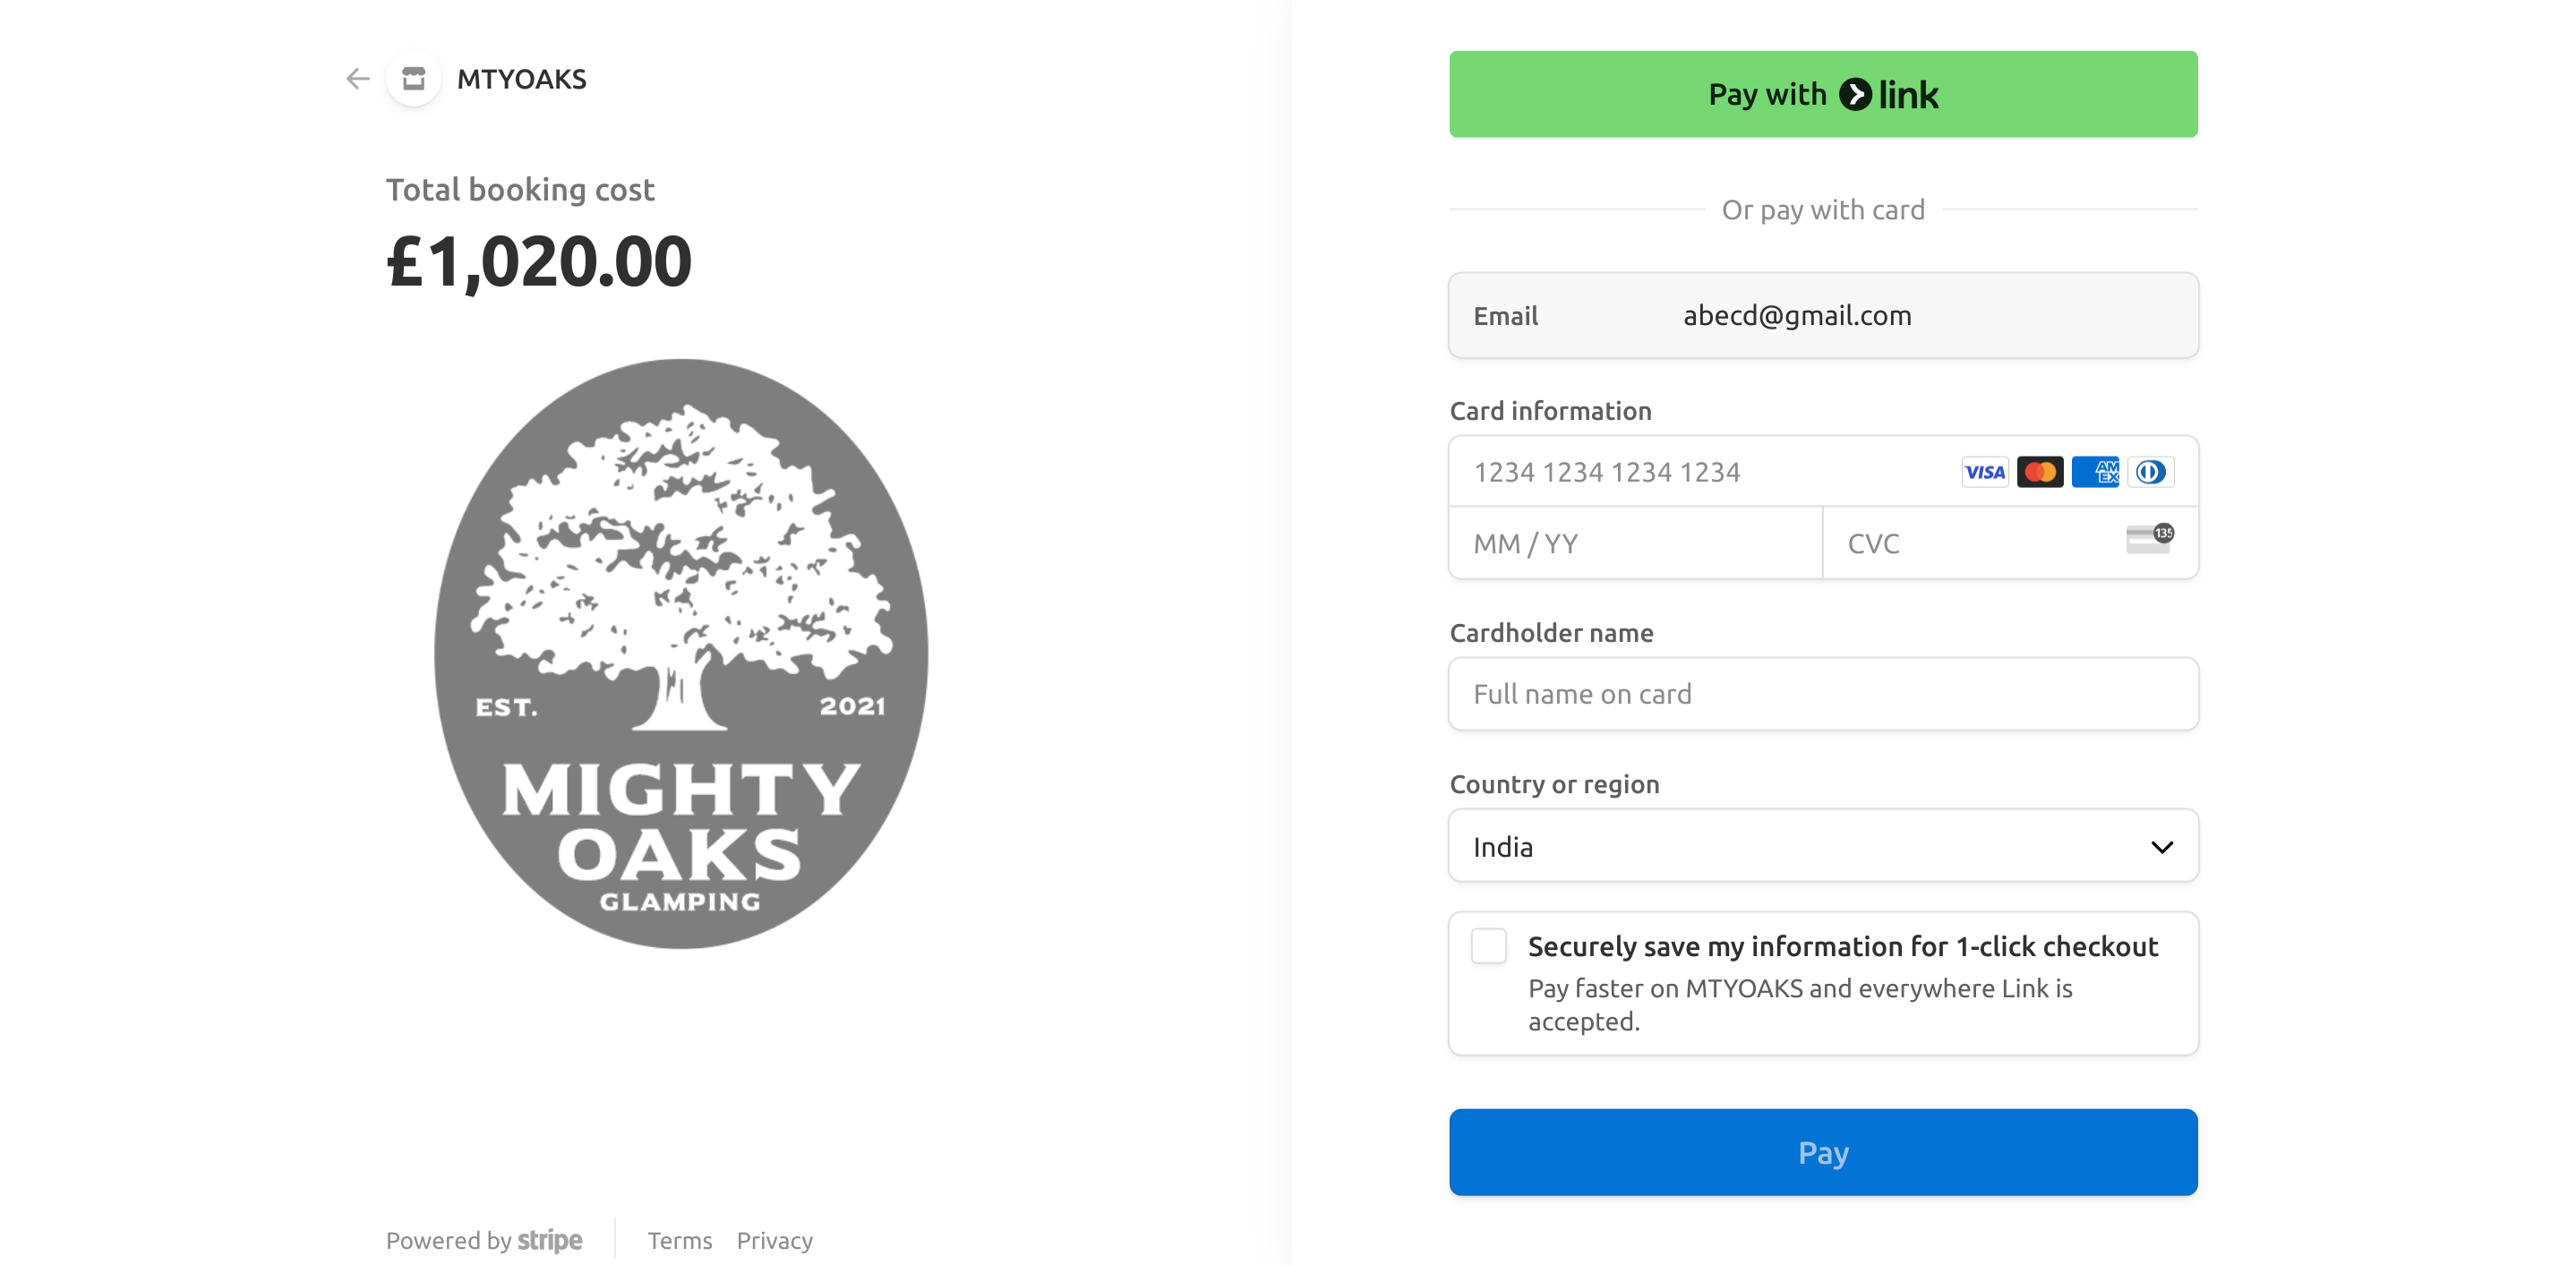 Mighty Oaks Glamping payment using stripe